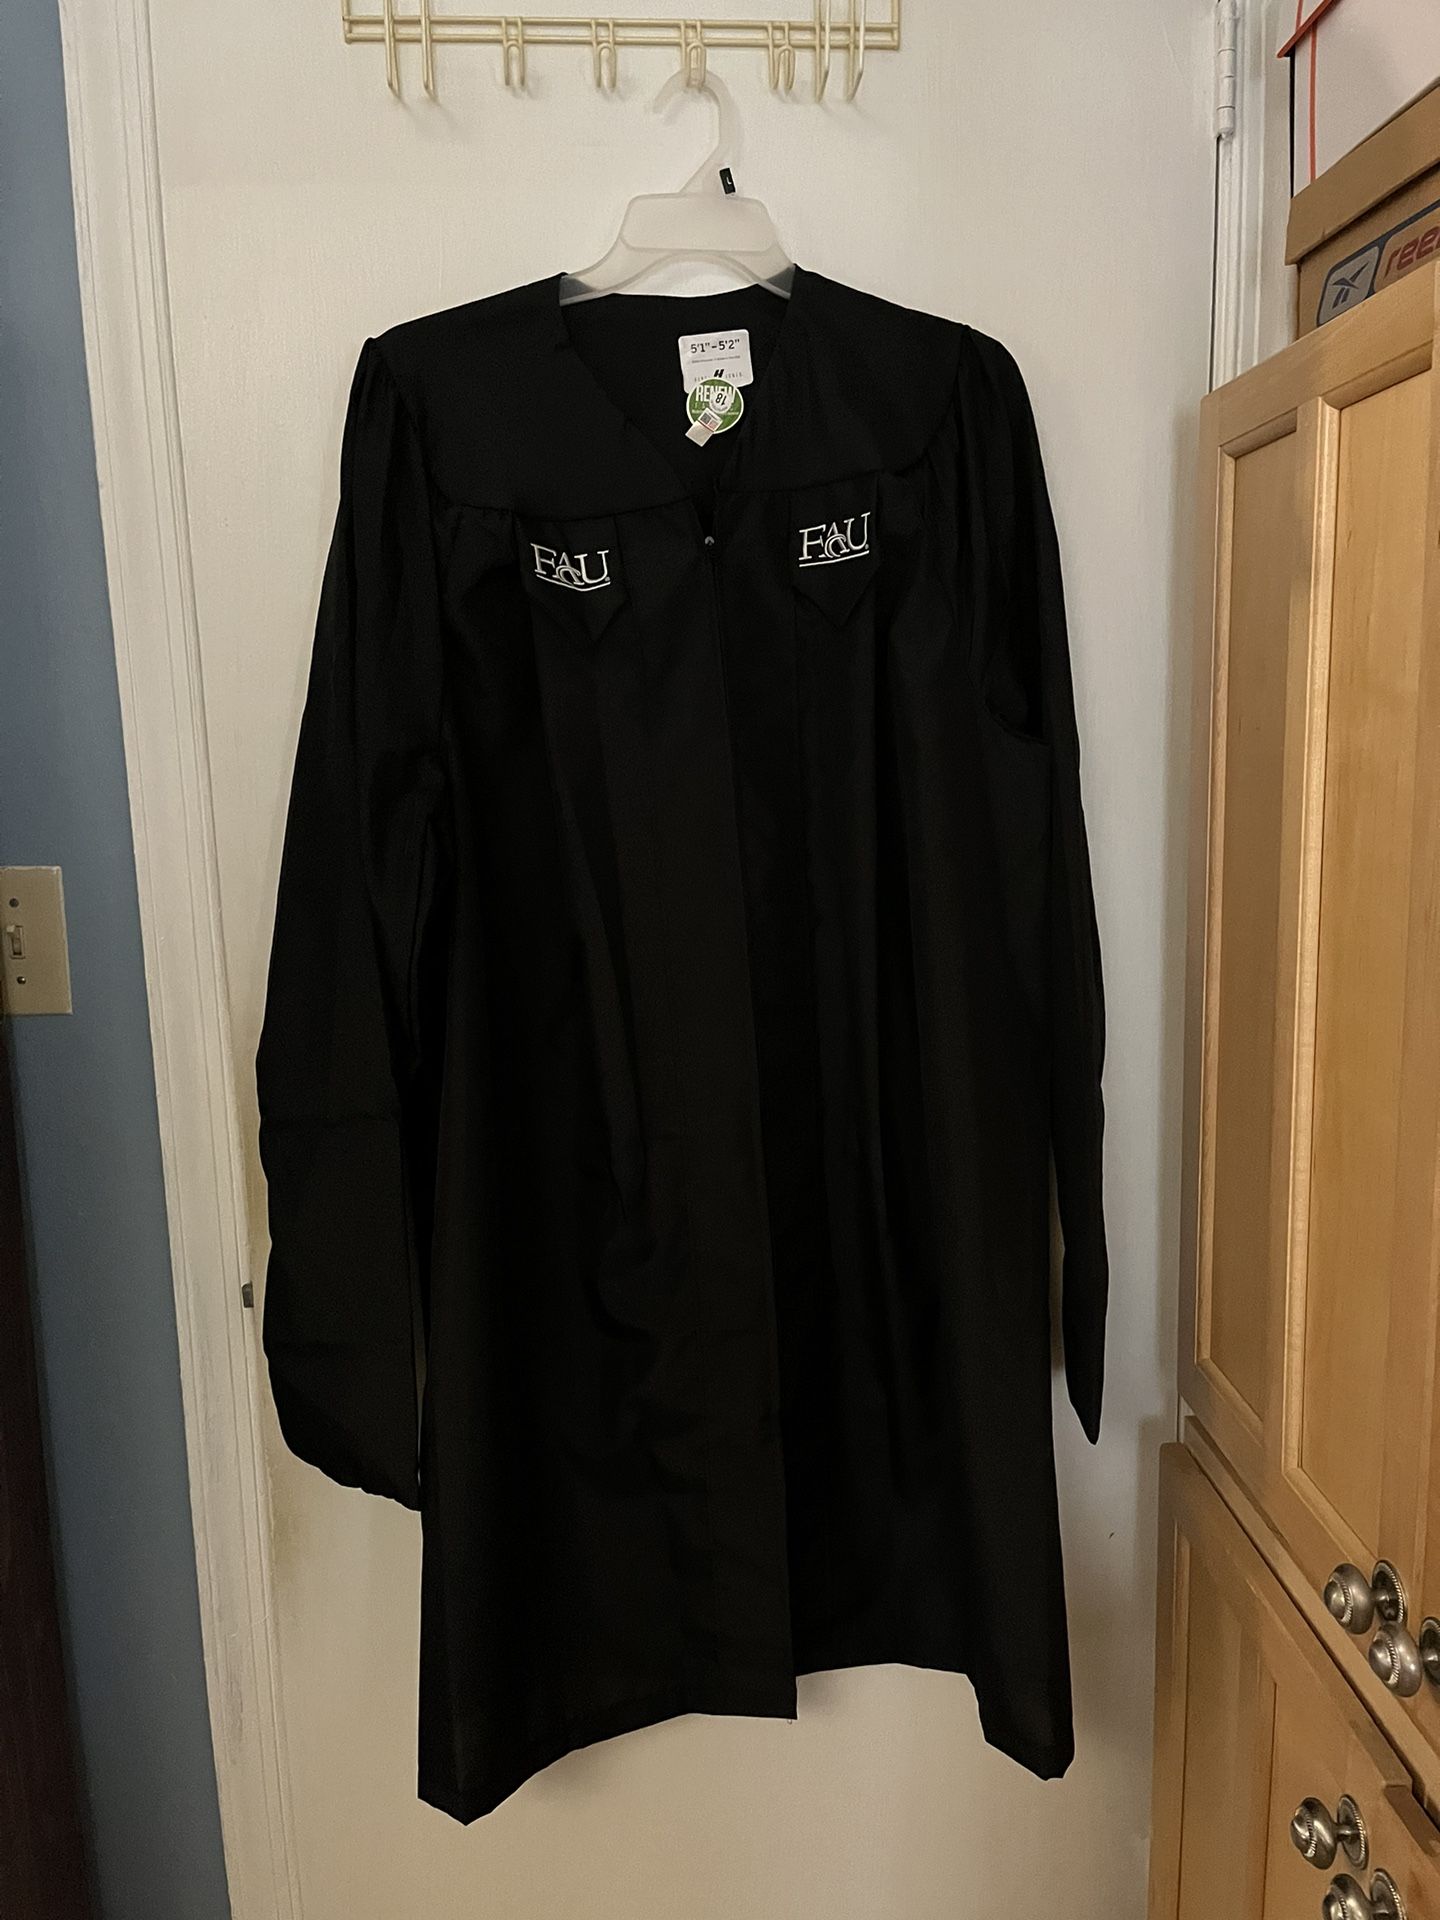 FAU Graduation Cap, Gown, abd Hood (Master’s Degree, College of Arts and Letters)